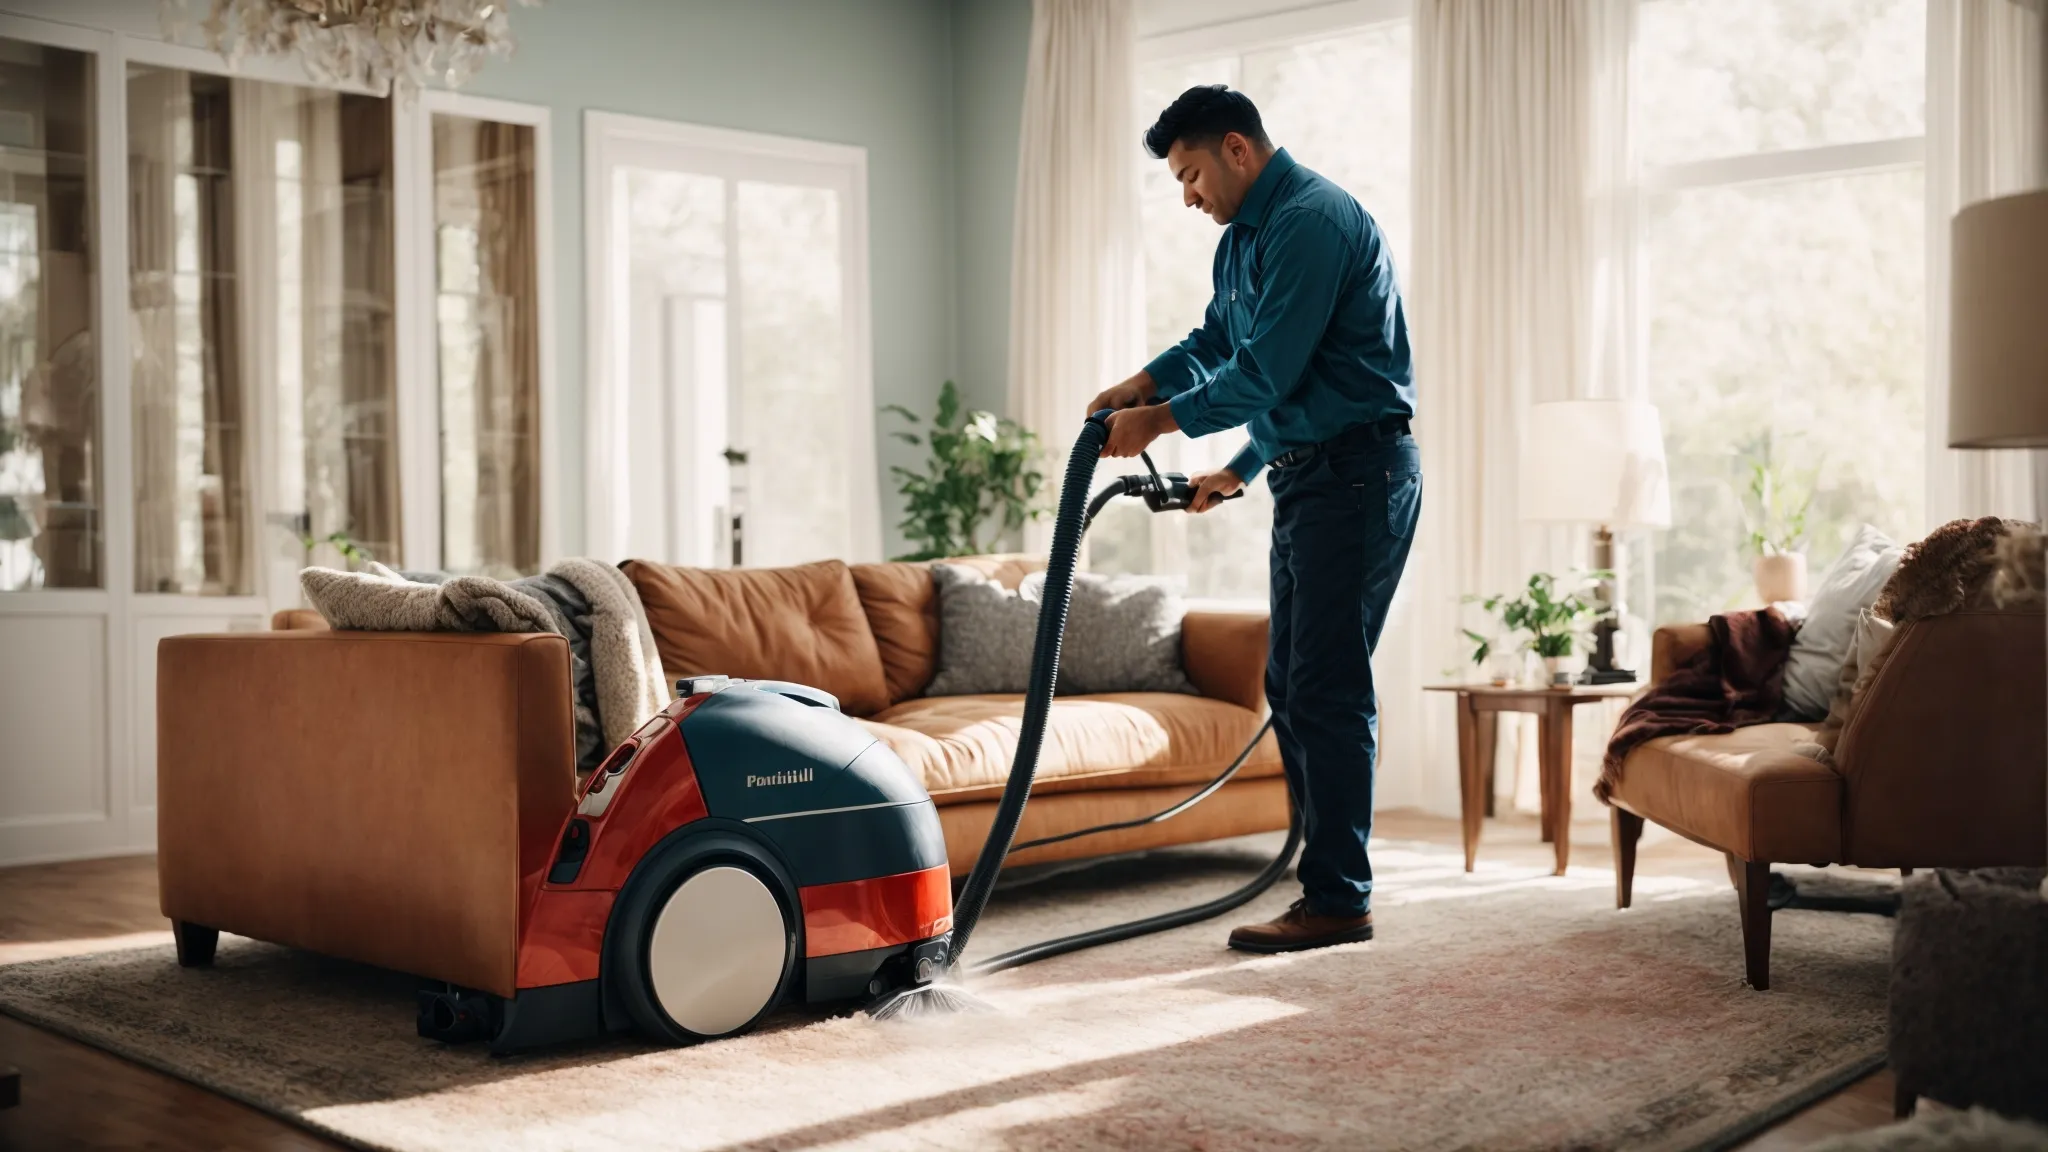 a professional carpet cleaner operates a steam cleaning machine across a vibrant, well-lit living room.